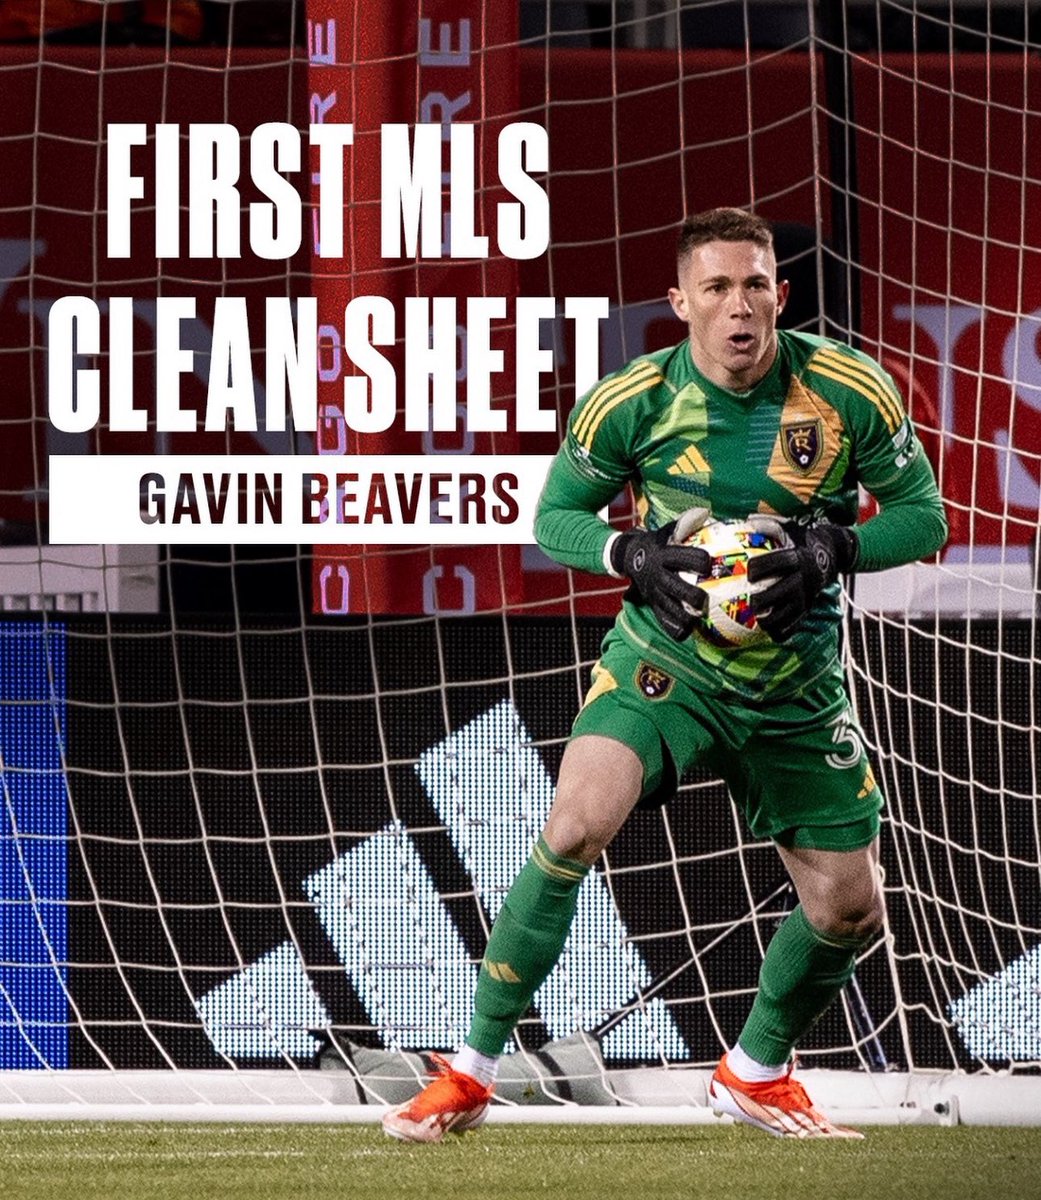 Someone bake a 🎂and stuff it with 💰!

Per @jeffrueter “…RSL's goalkeepers have 4.14 goals prevented; only Melia and McCarthy have fared better than that.”

Big shoutout to our #RSL Keeper Crew! A Defense so good you almost forget about it. @ZacMacMath @GKCoach_Mirza 🦫 

#RSL